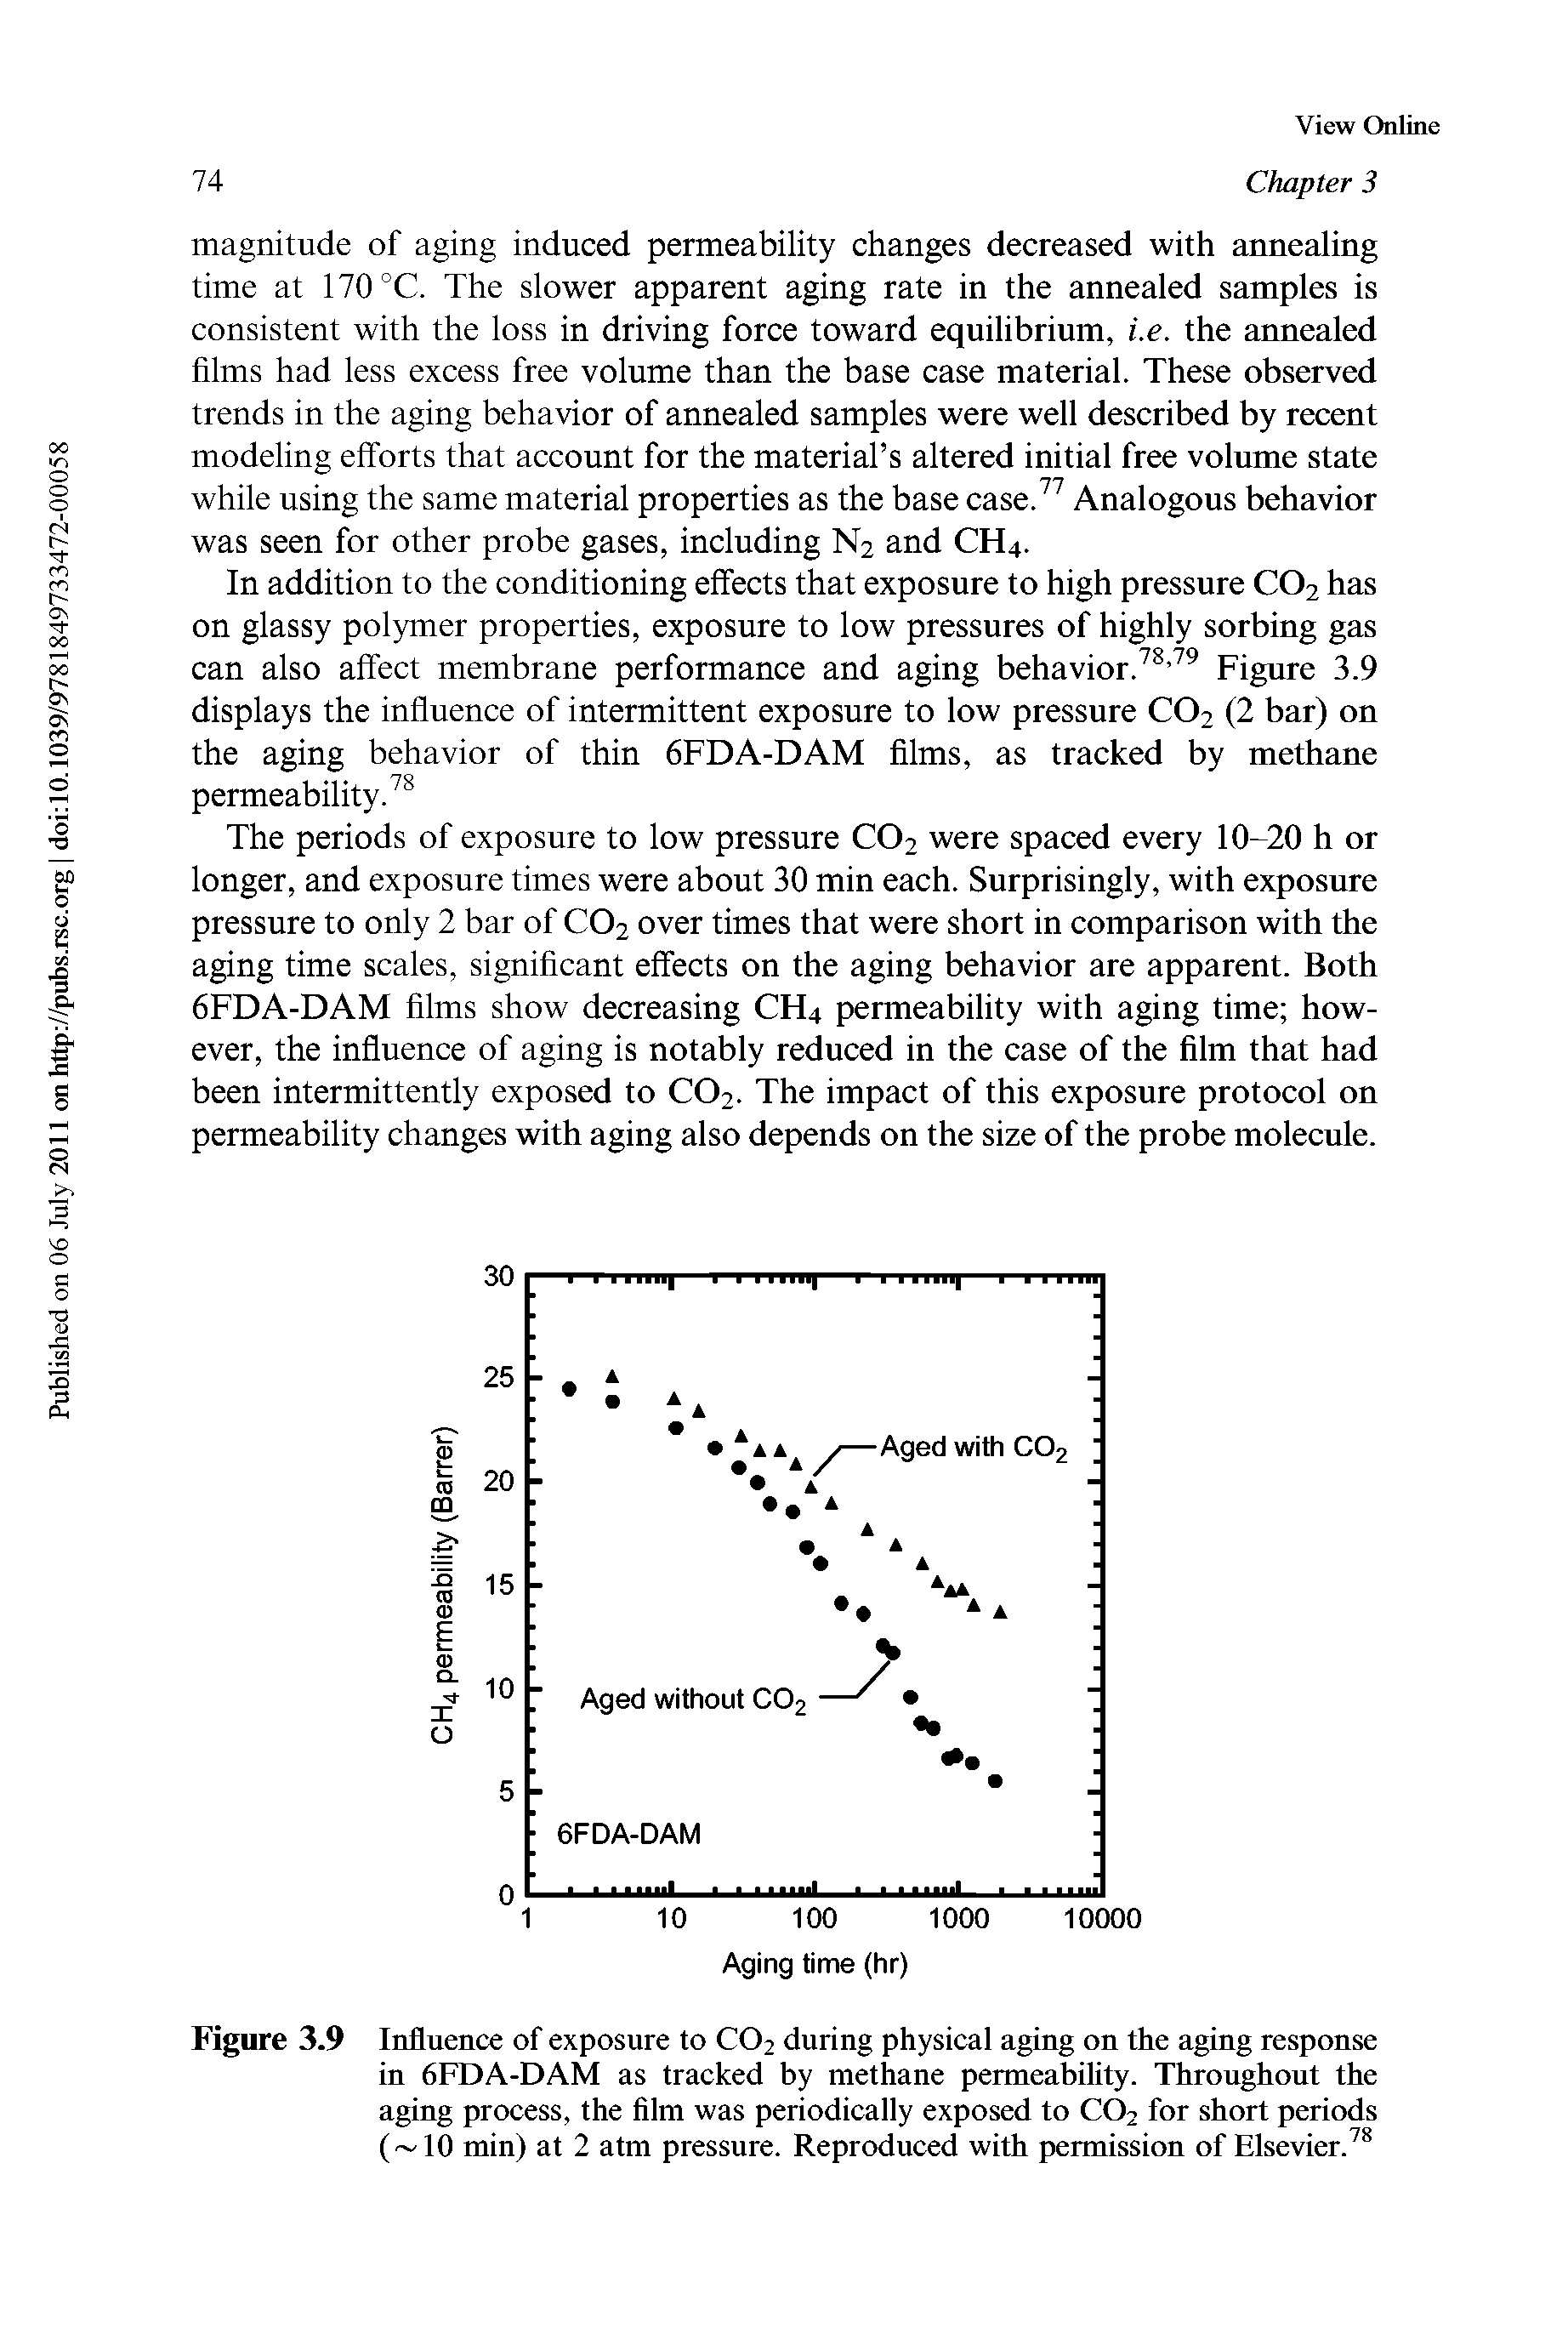 Figure 3.9 Influence of exposure to CO2 during physical aging on the aging response in 6FDA-DAM as tracked by methane permeability. Throughout the aging process, the film was periodically exposed to CO2 for short periods ( 10 min) at 2 atm pressure. Reproduced with permission of Elsevier. ...